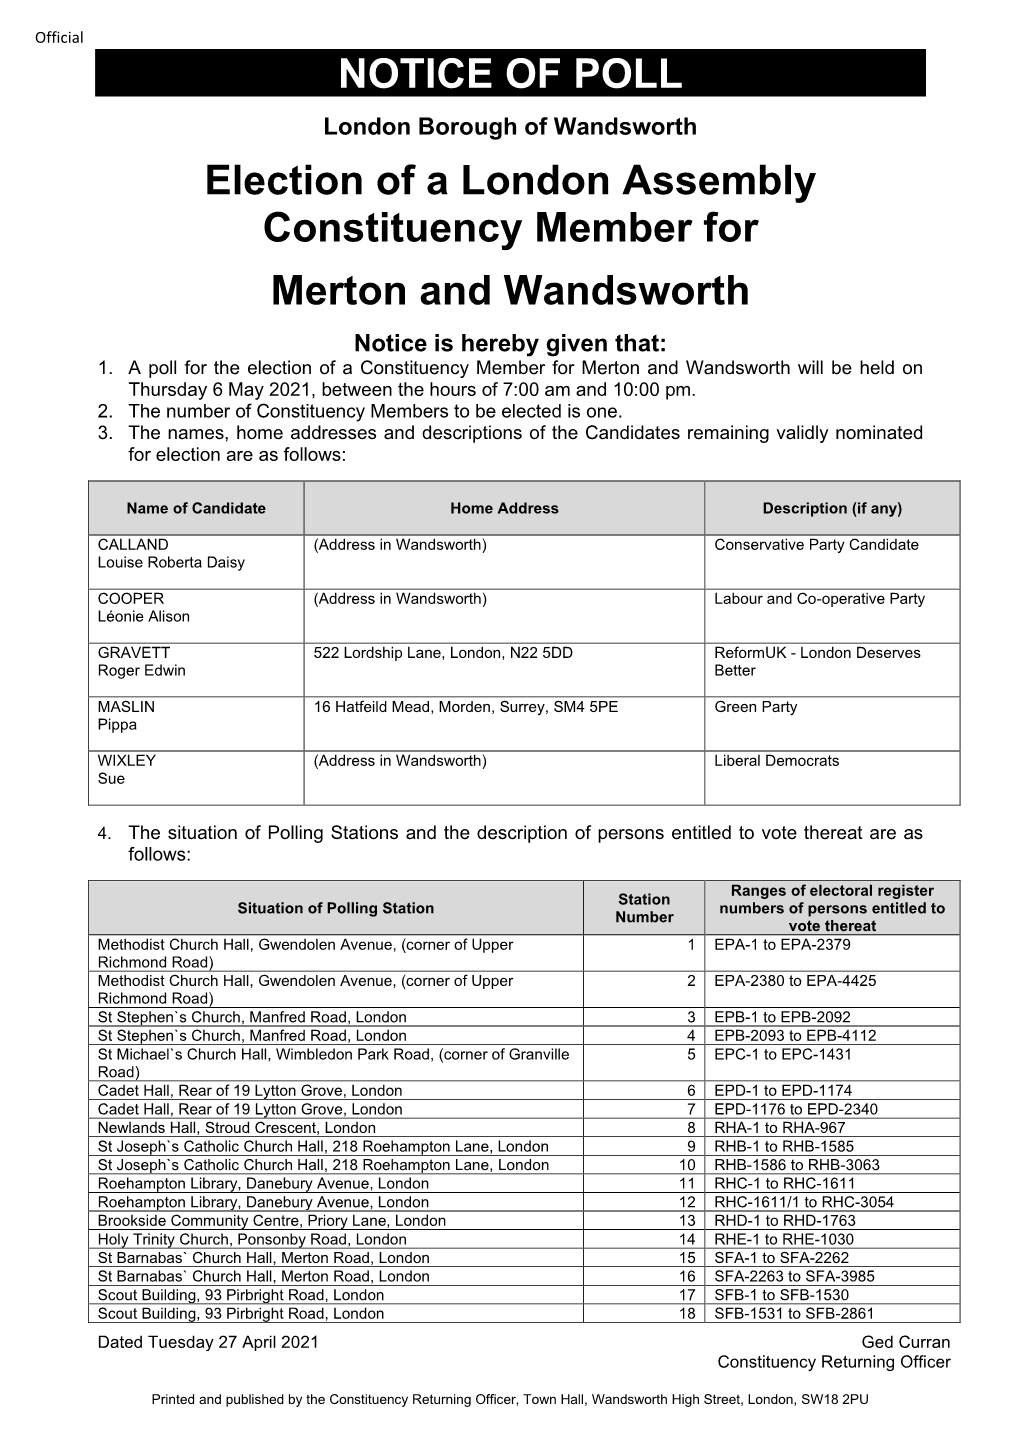 NOTICE of POLL Election of a London Assembly Constituency Member for Merton and Wandsworth